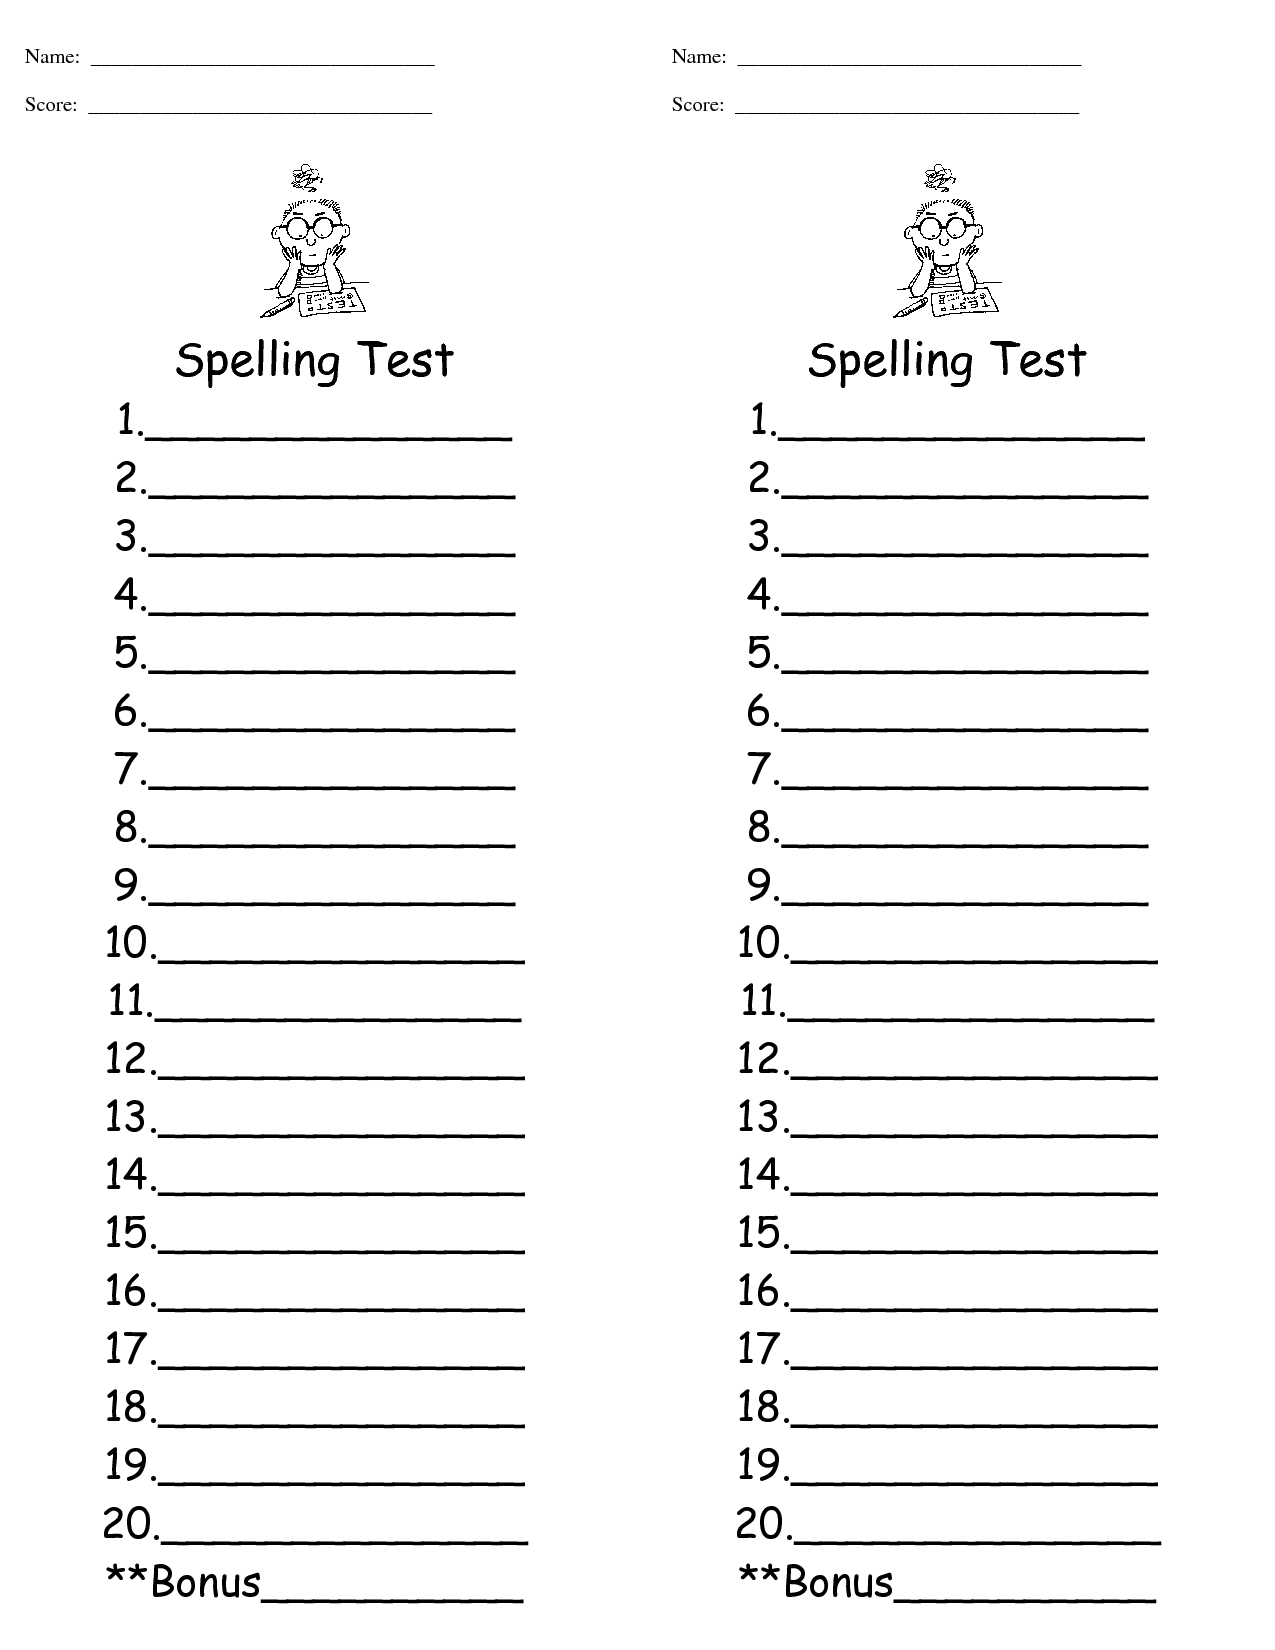 free-spelling-test-template-one-extra-degree